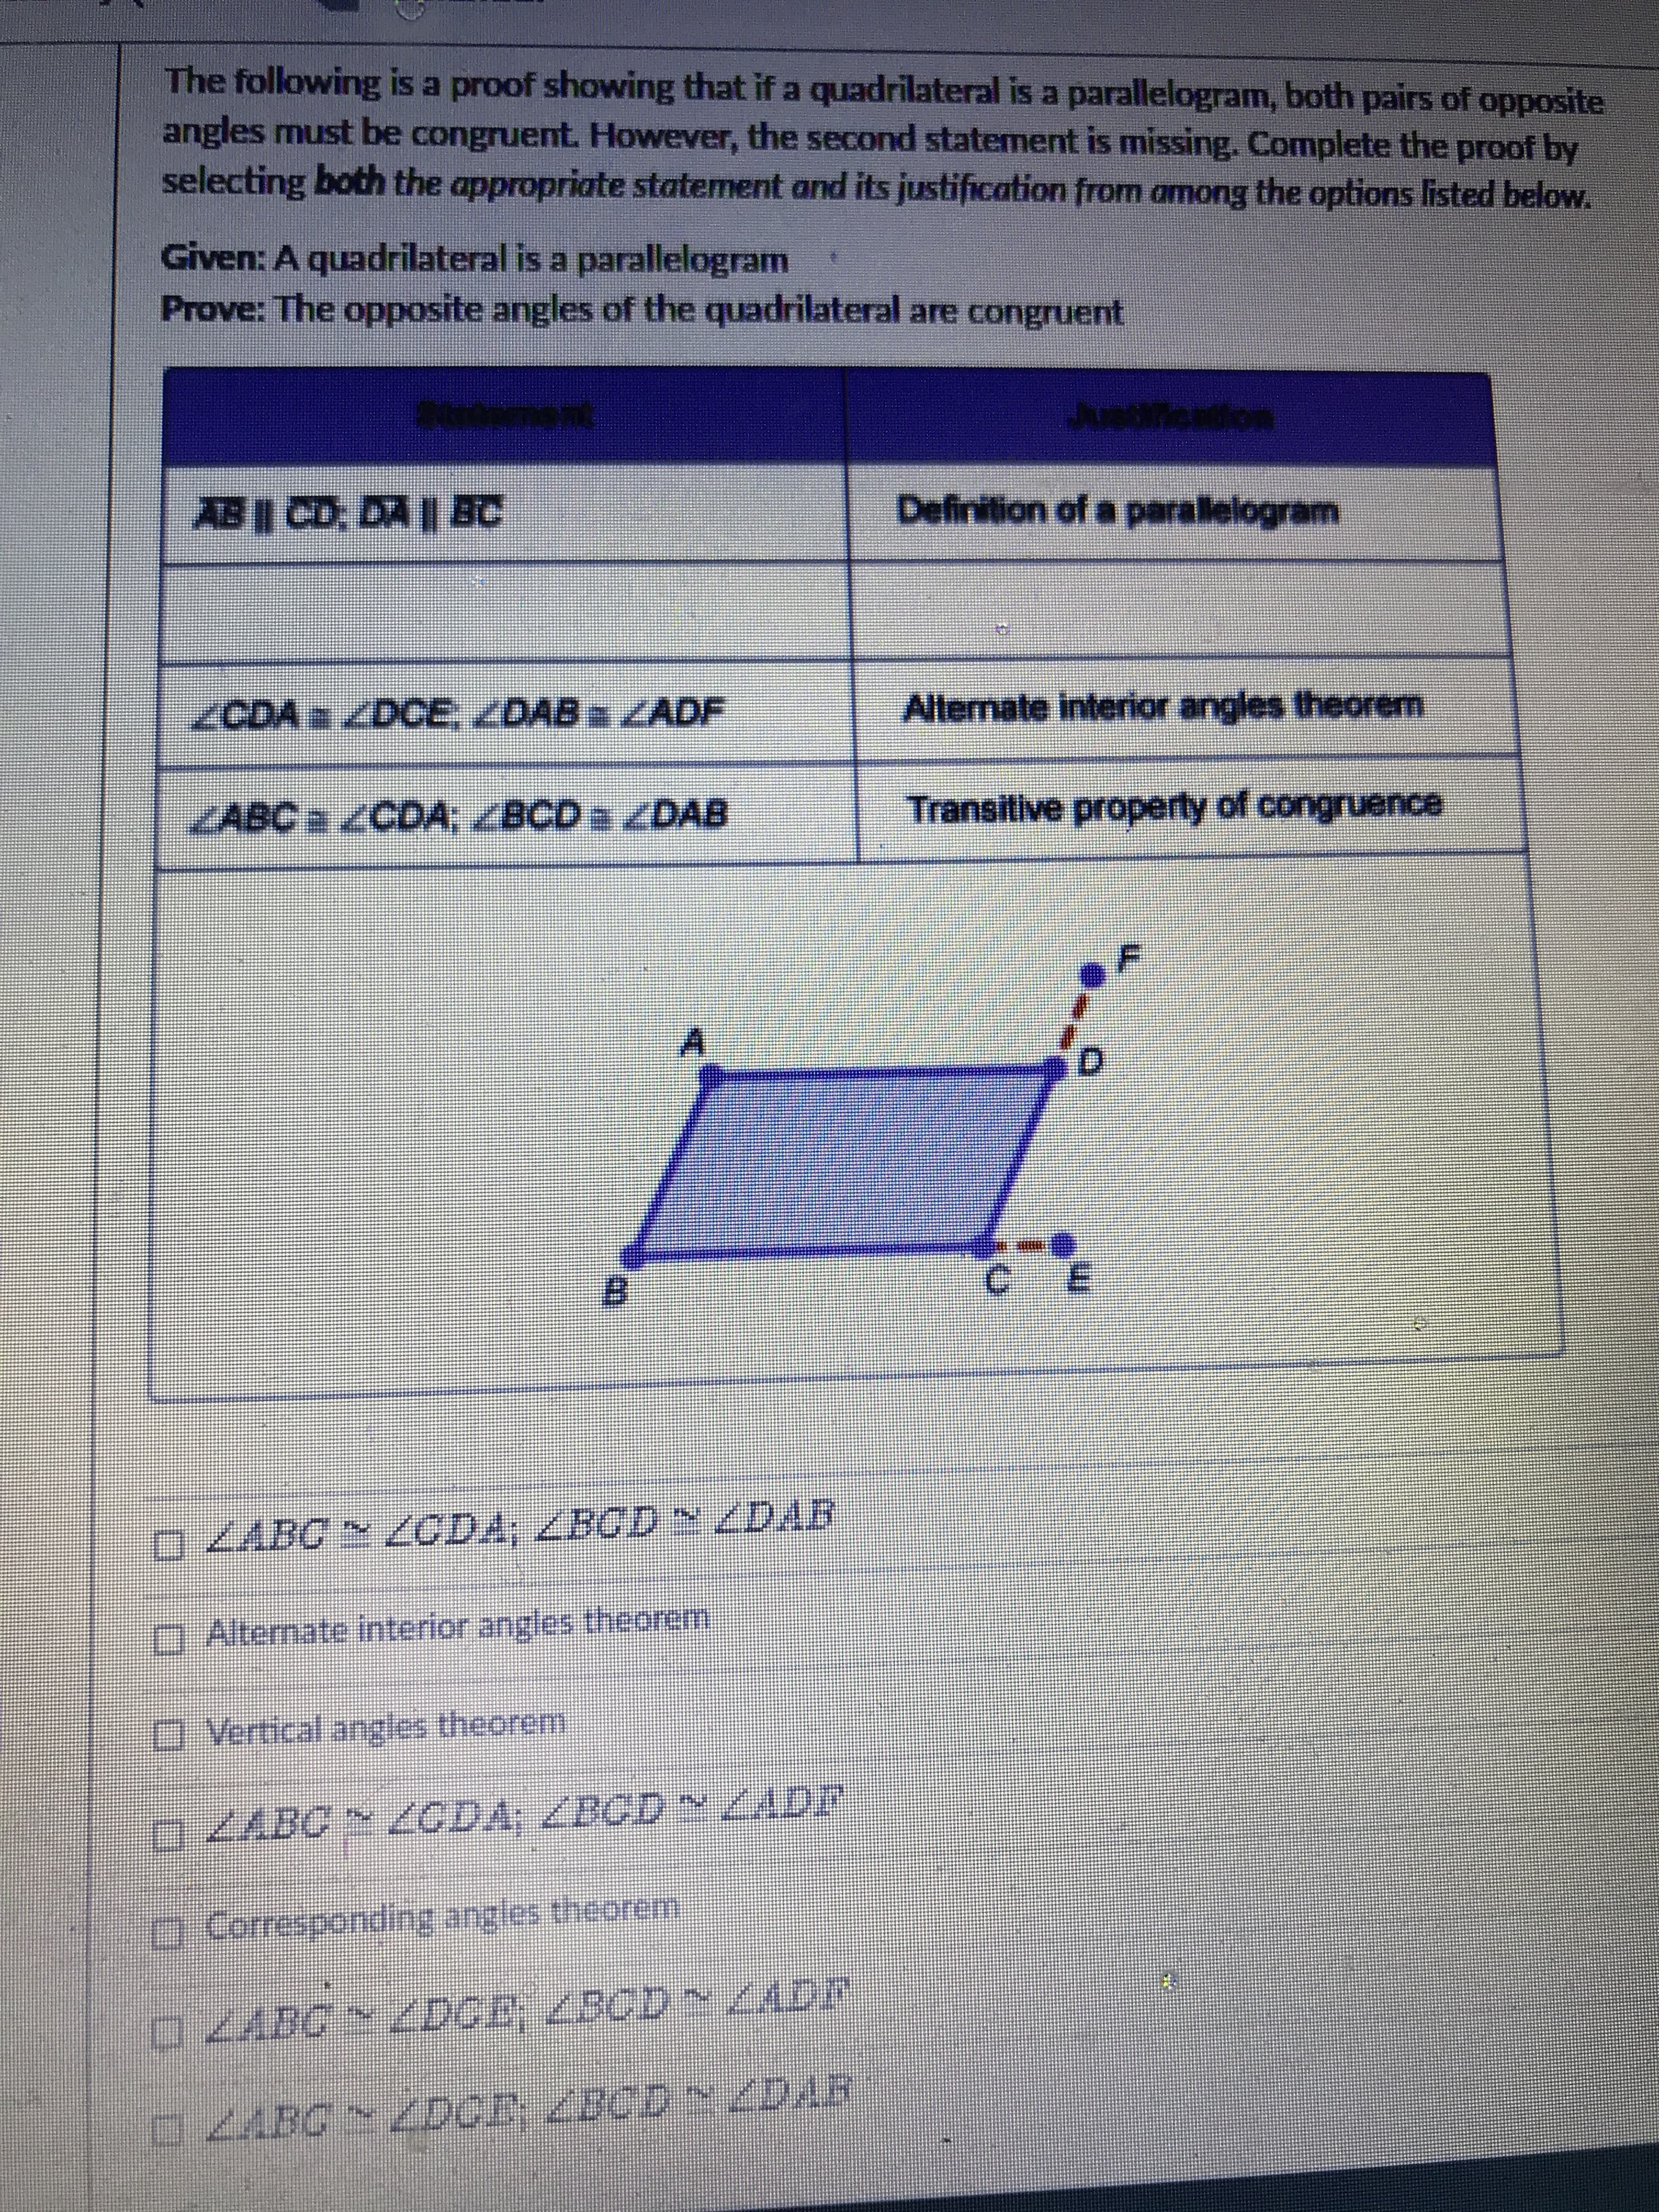 The following is a proof showing that if a quadrilateral is a parallelogram, both pairs of opposite
angles must be congruent. However, the second statement is missing. Complete the proof by
selecting both the appropriate statement and its justification from among the options listed below.
Given: A quadrilateral is a parallelogram
Prove: The opposite angles of the quadrilateral are congruent
AB CD: DA | BC
Definition of a paralelogram
/CDA /DCE, ZDABZADF
Alternate interior angles theorem
KABC /CDA, ZBCD ZDAB
Transitive property of congruence
B.
0ZABC N ODA; ZBCD DAR
O Alternate interior angles theorem
OVertical angles theorem
ZABC ZCDA; ZBCD N ZADF
சனச
O Corresponding angles theorem
